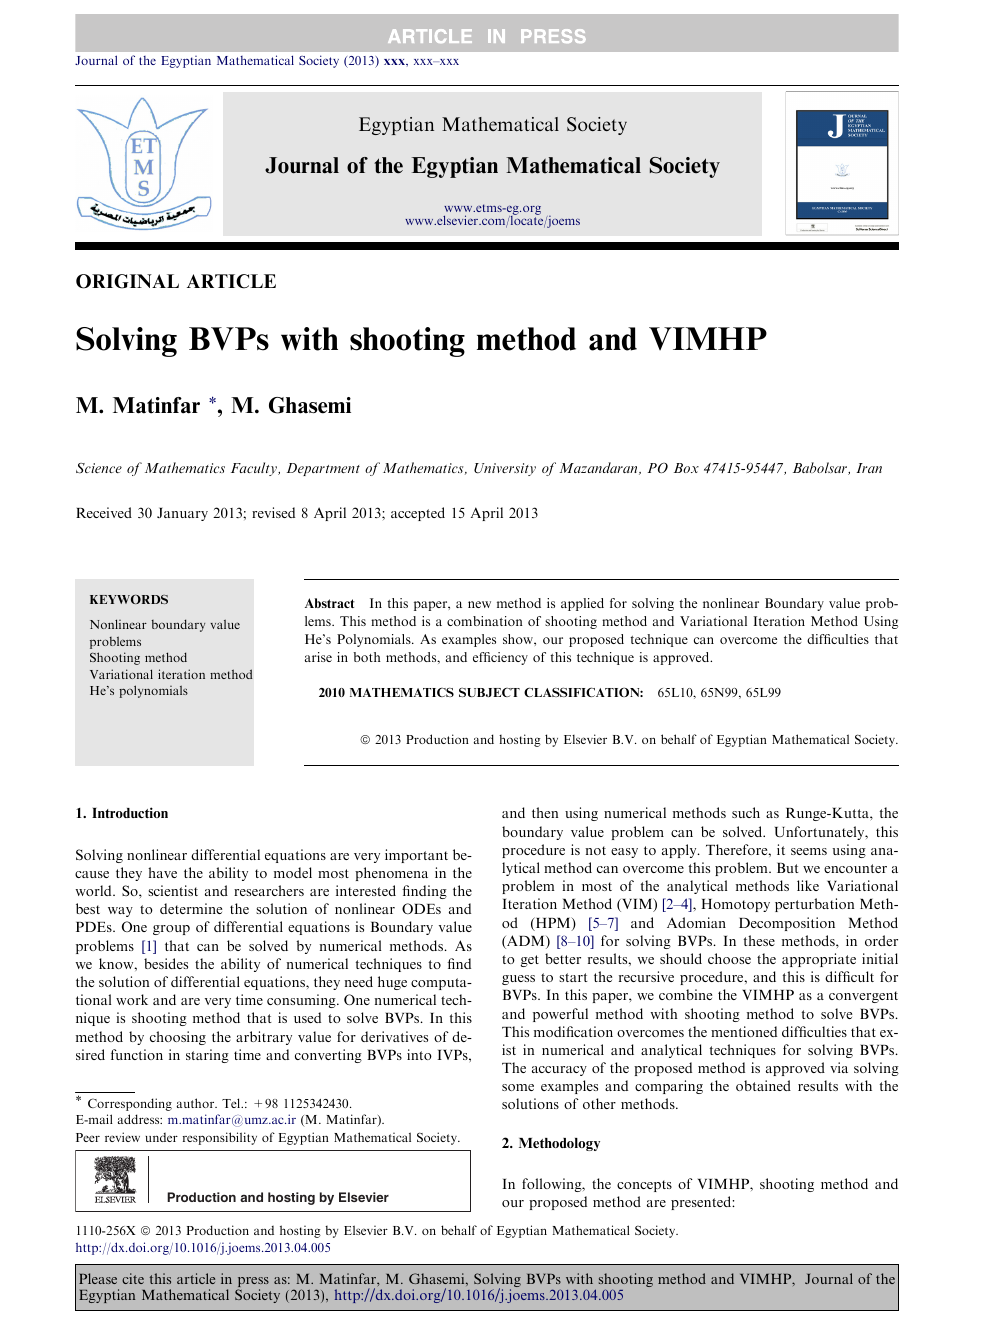 Solving Bvps With Shooting Method And Vimhp Topic Of Research Paper In Mathematics Download Scholarly Article Pdf And Read For Free On Cyberleninka Open Science Hub